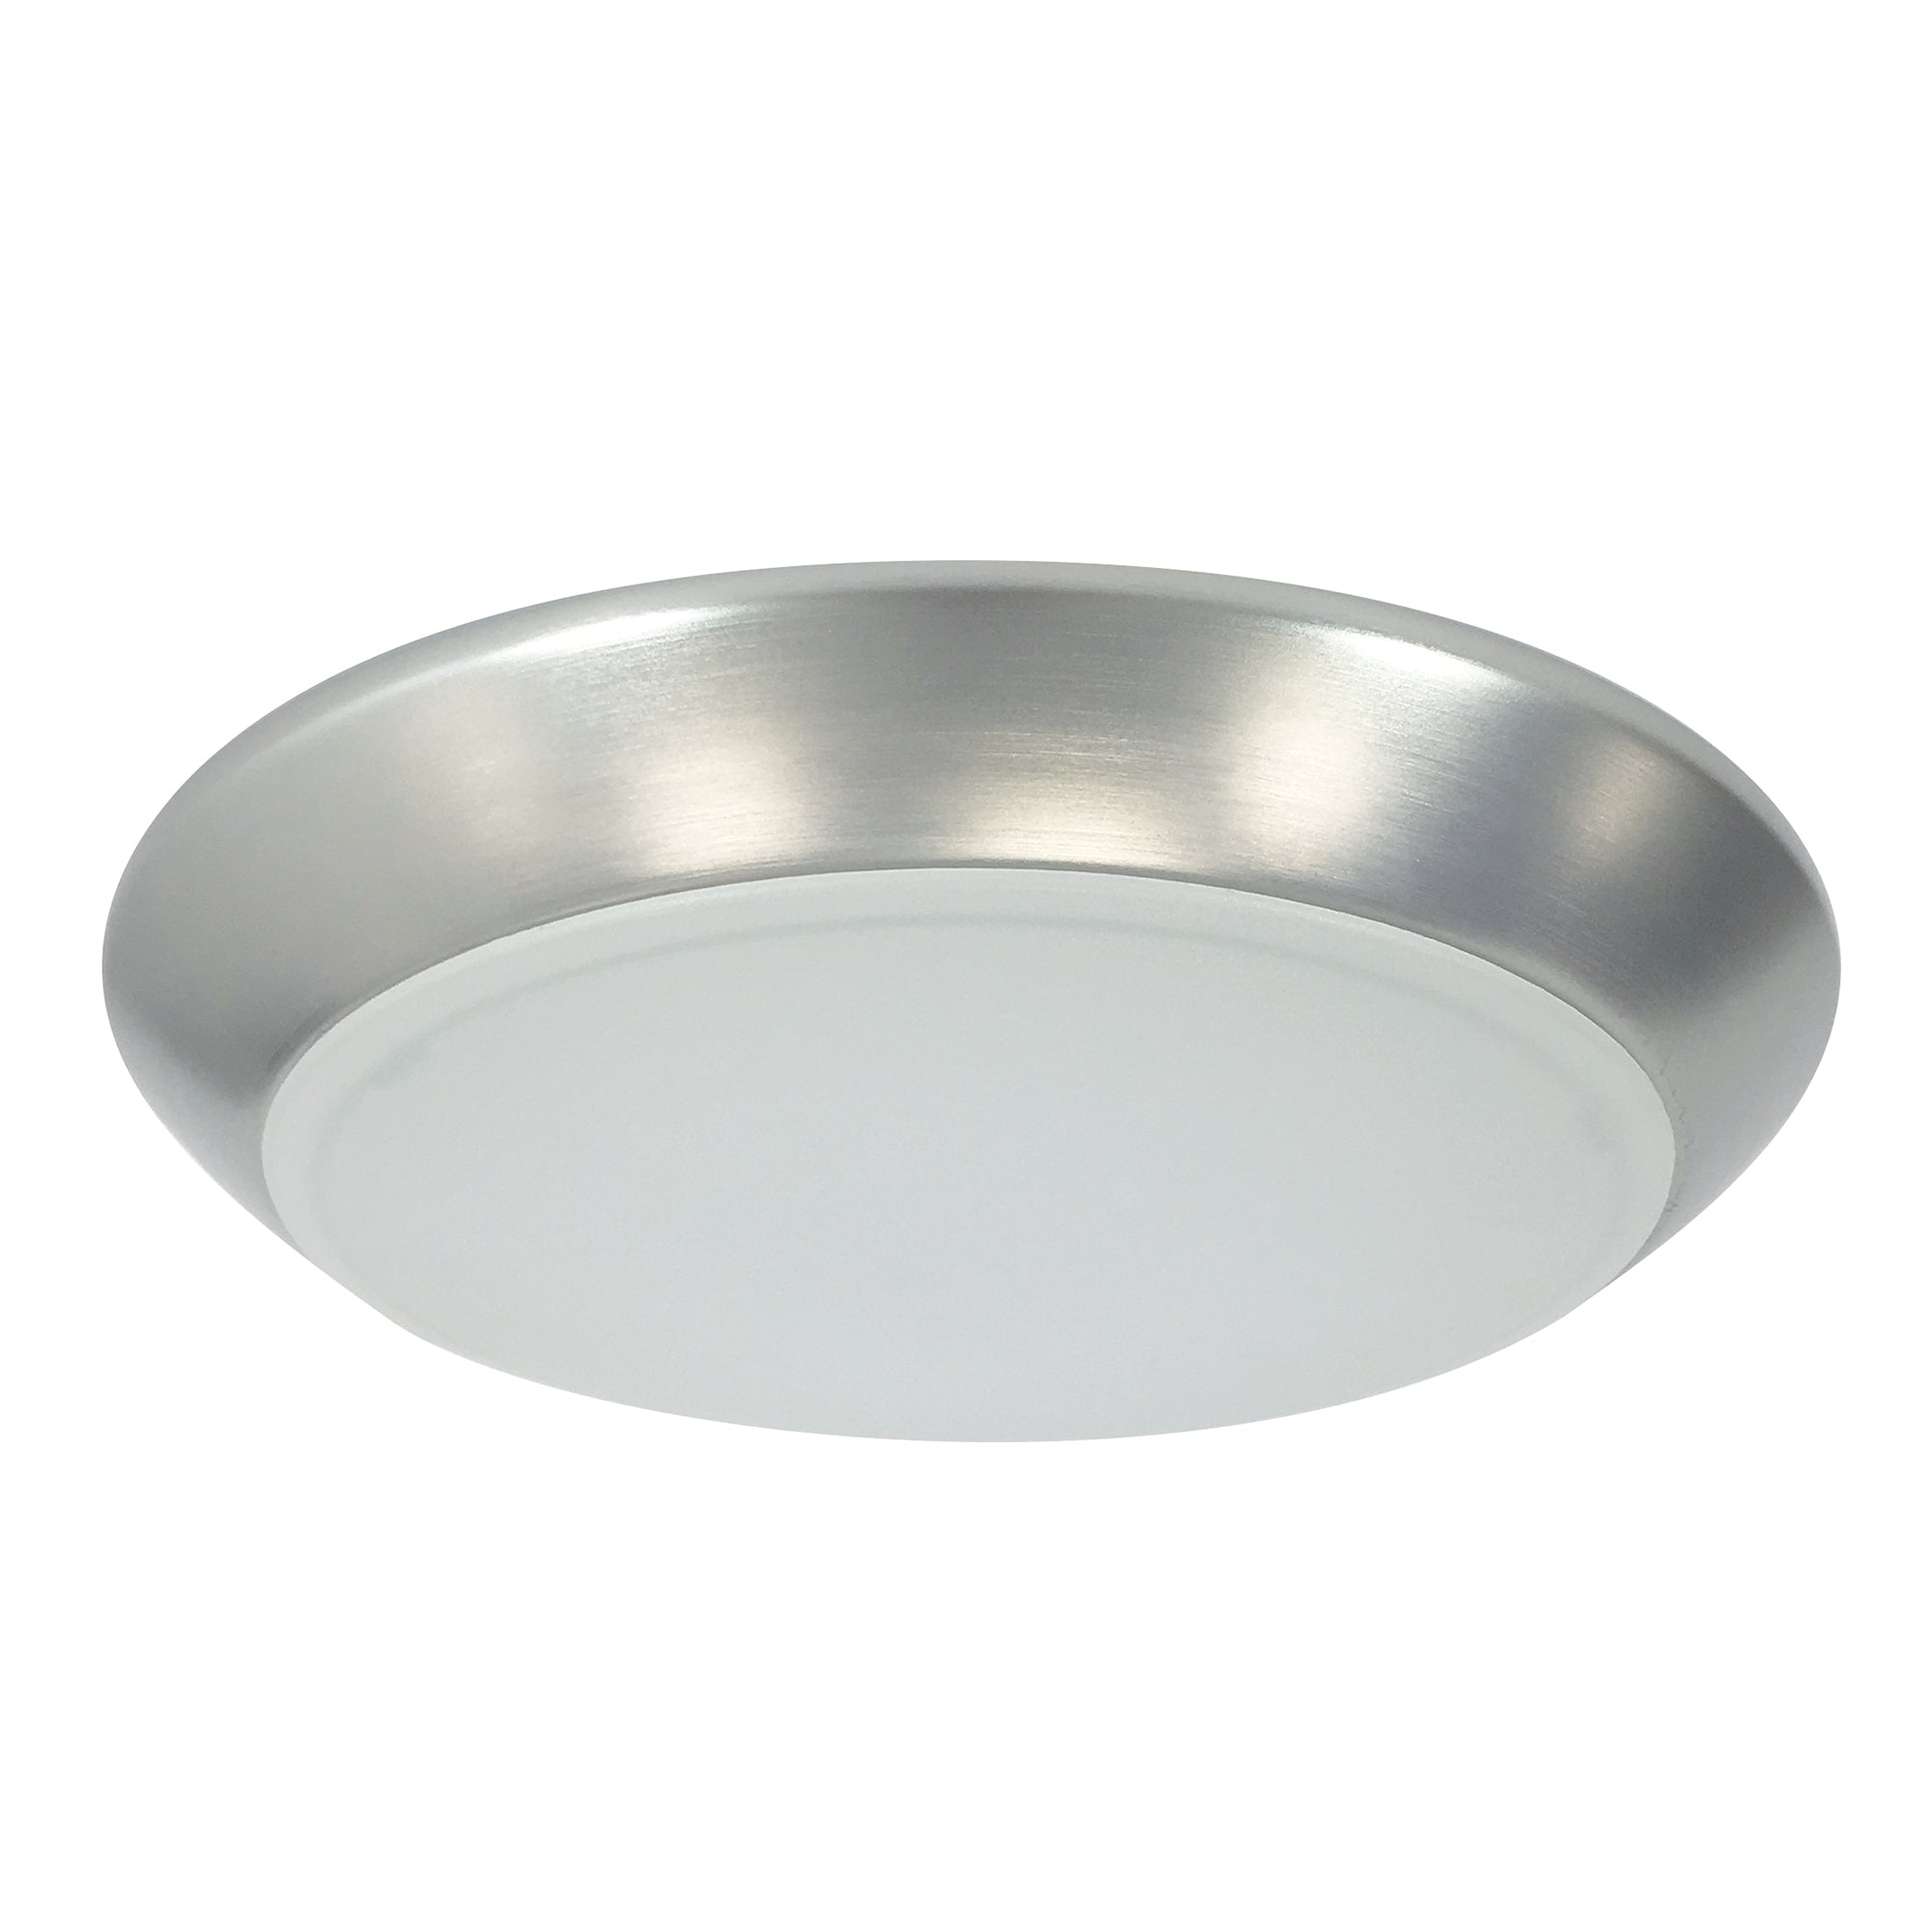 Nora Lighting NLOPAC-R8T2430NM - Surface - 8 Inch AC Opal LED Surface Mount, 2150lm / 32W, 3000K, Natural Metal finish